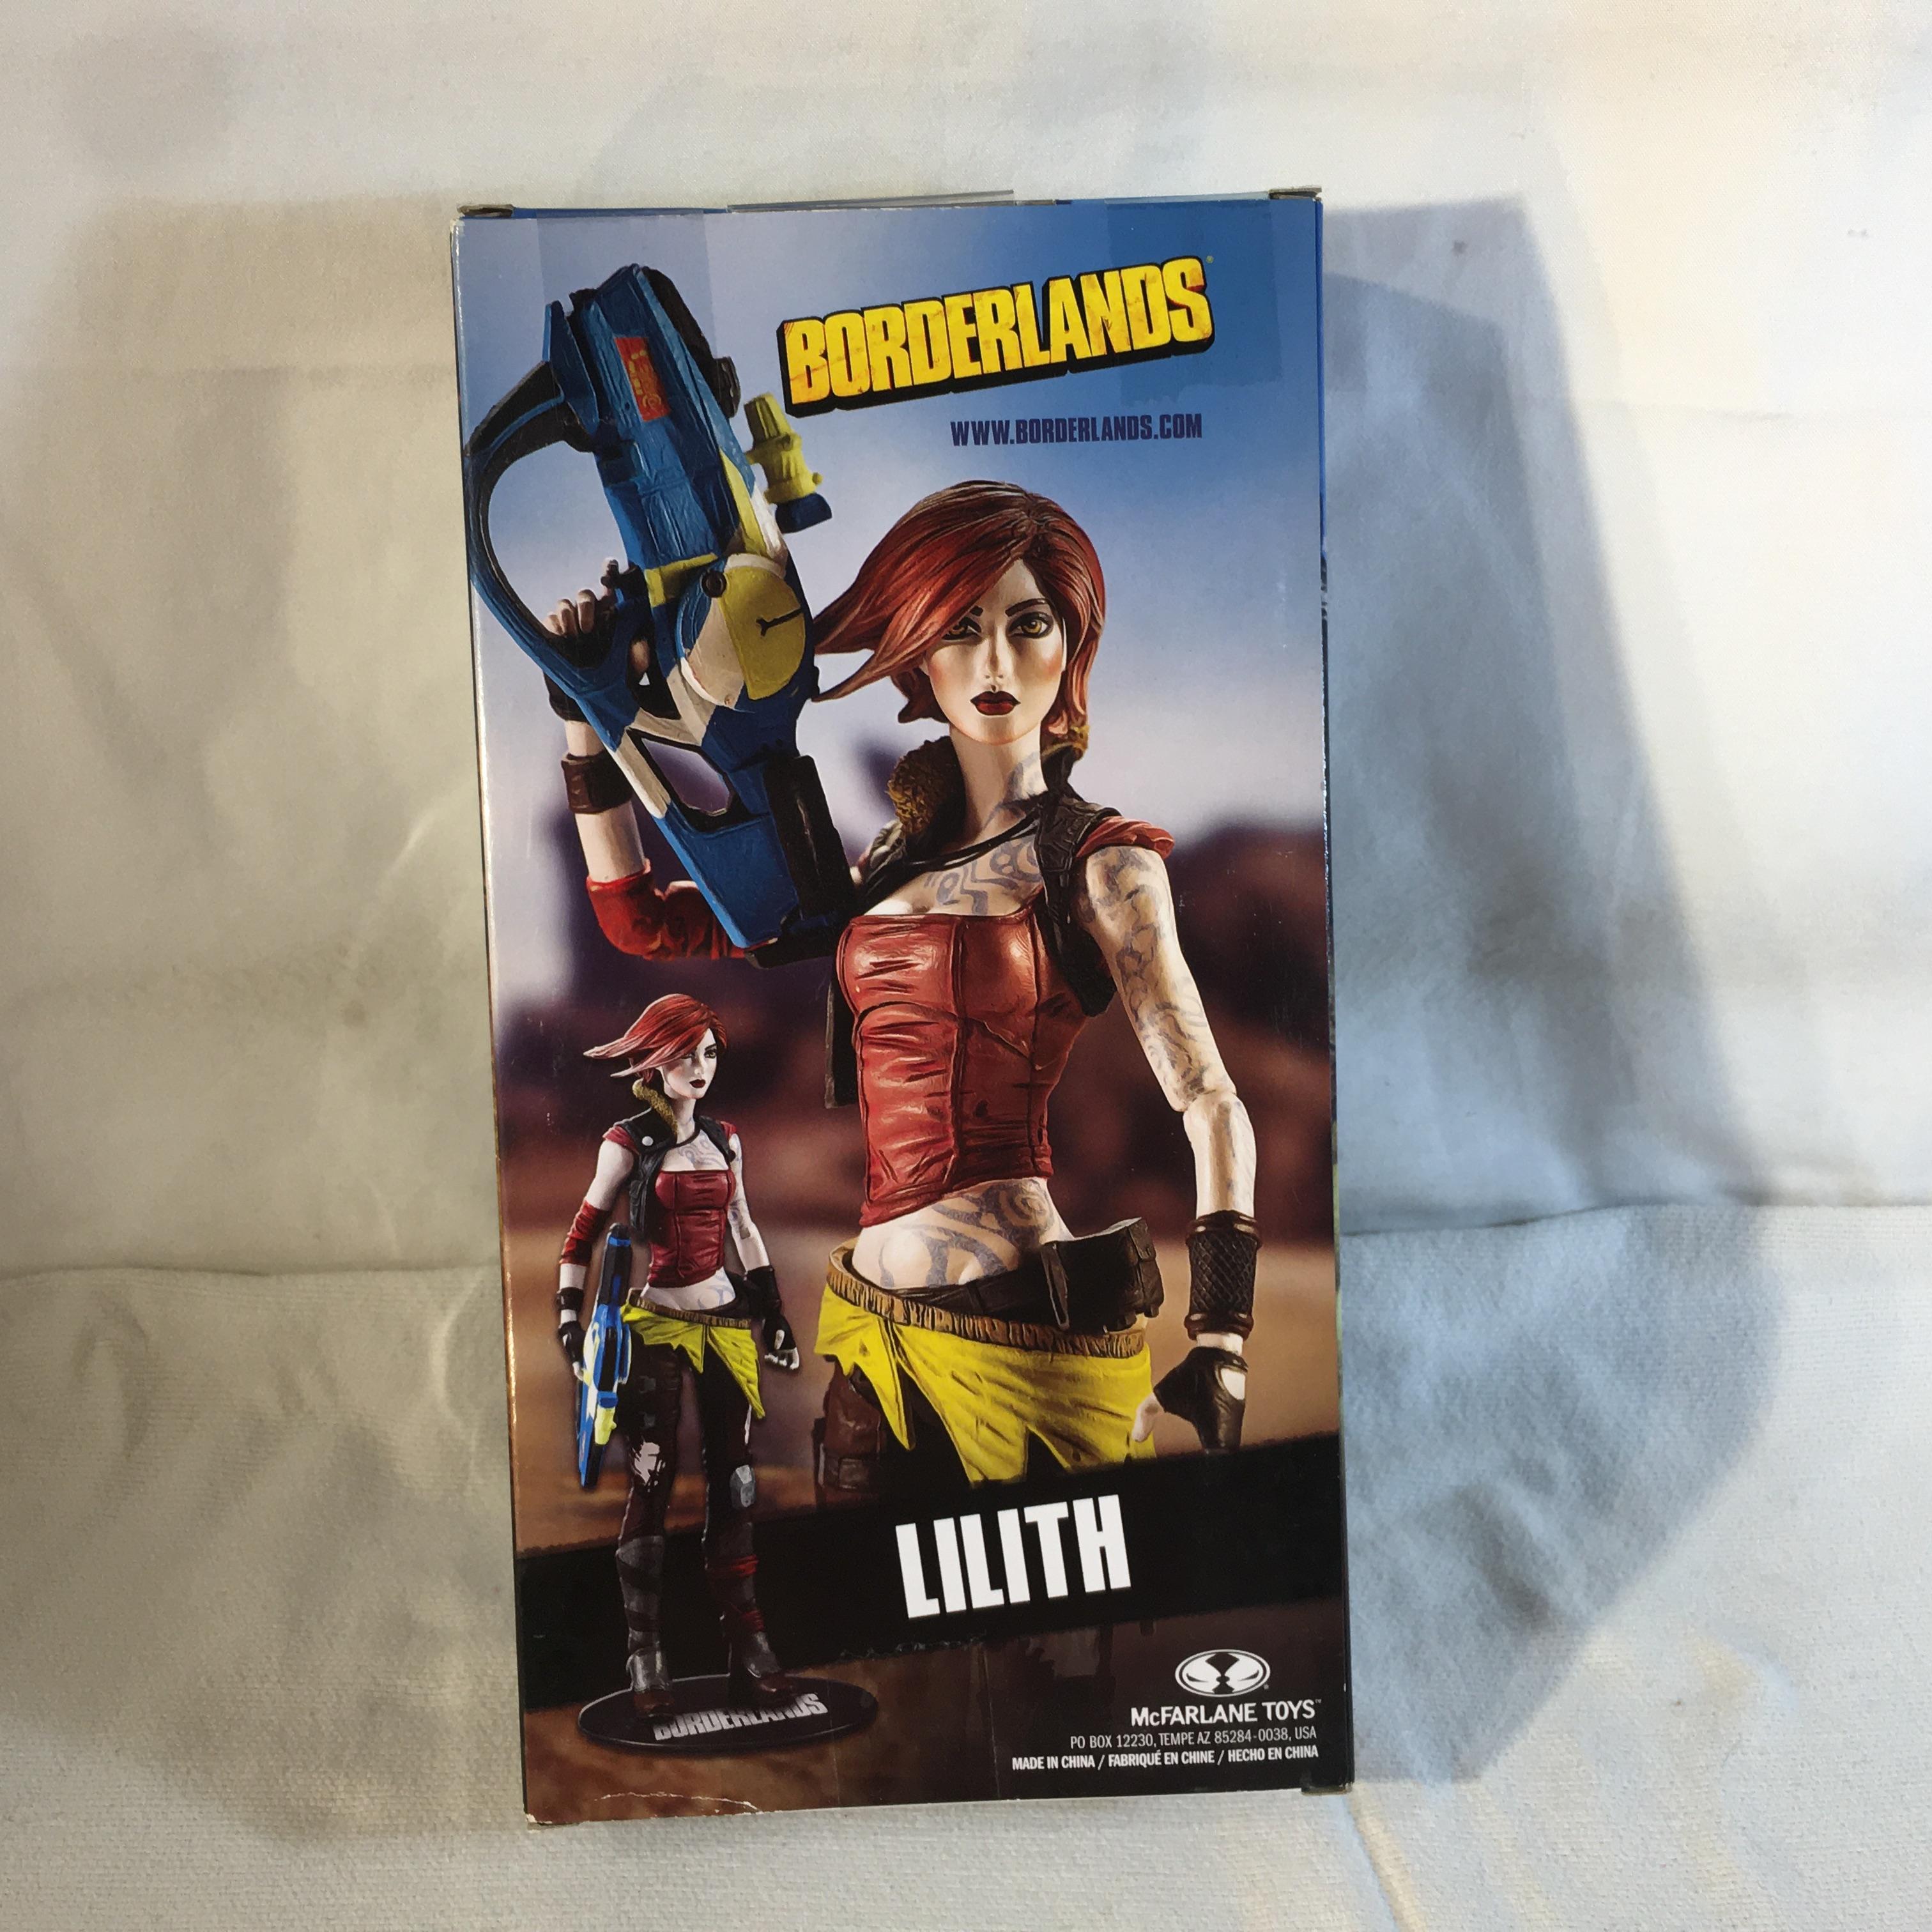 NIB Collector Gearbox Borderlands Lilith 8"Tall Figure